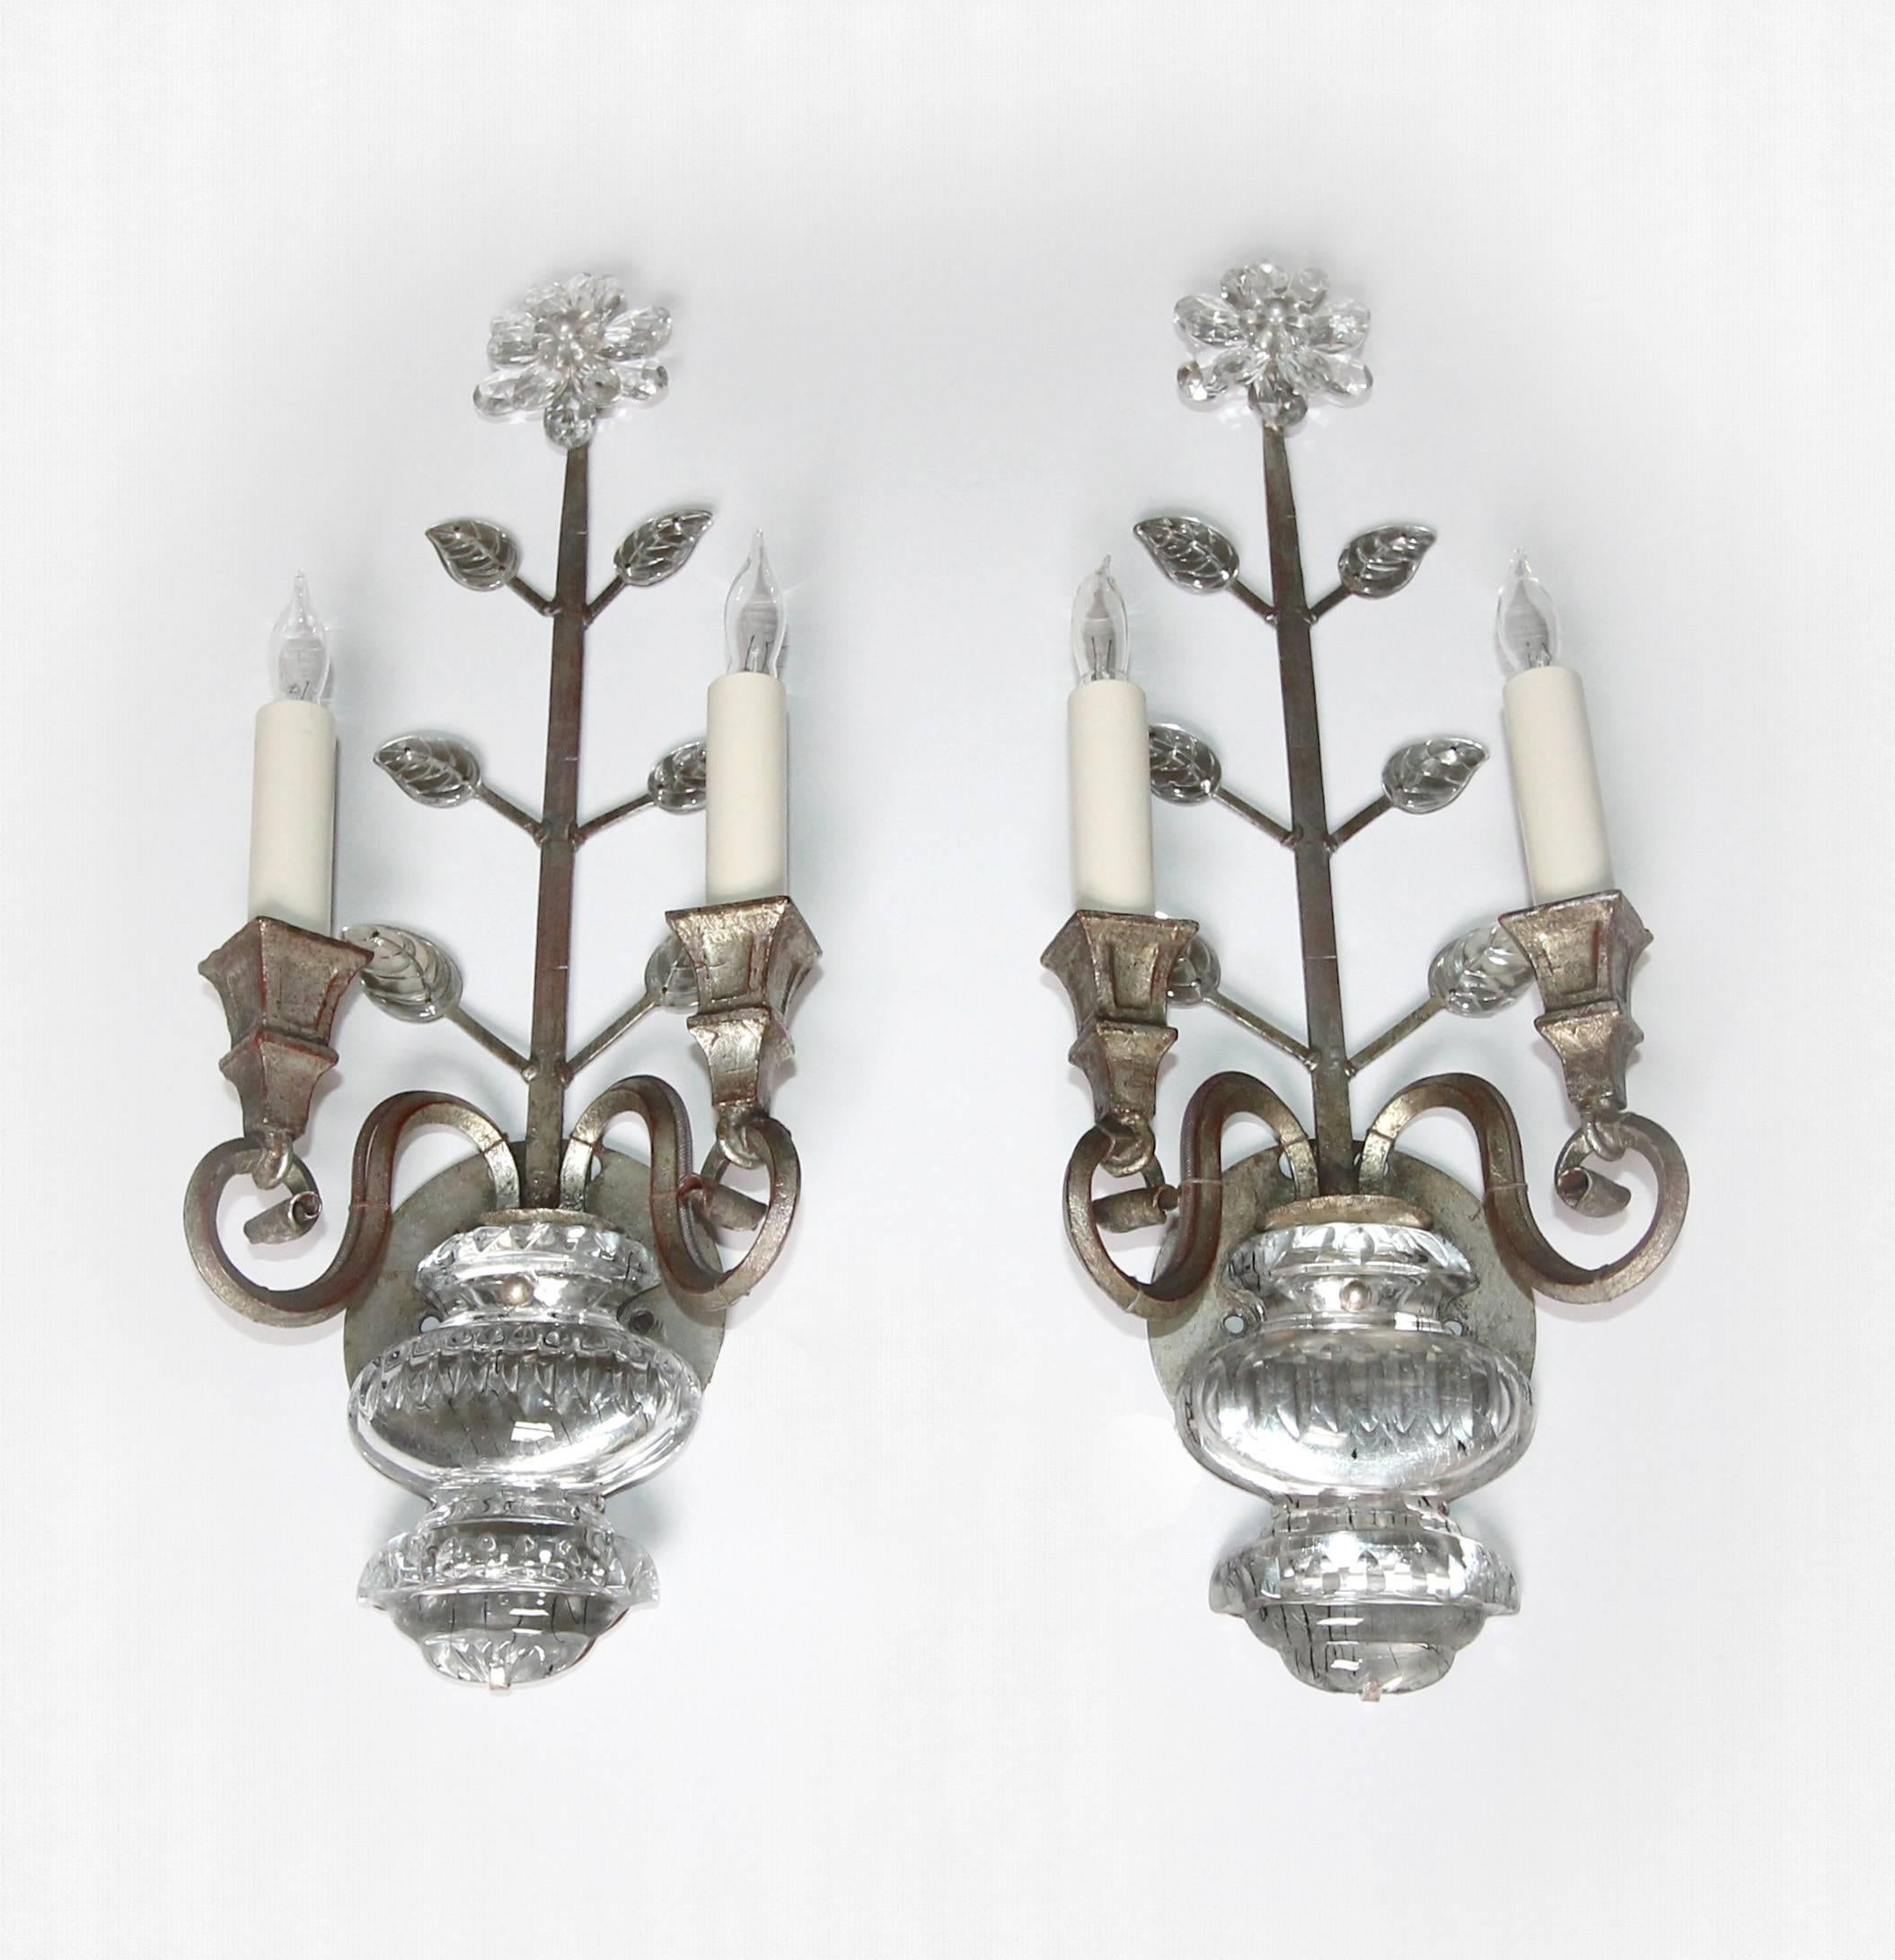 Pair of silver gilt iron floral sconces in the style of Maison Baguès with crystal leaves and urn motif. Each sconce uses two candelabra base bulbs. Newly rewired for US.